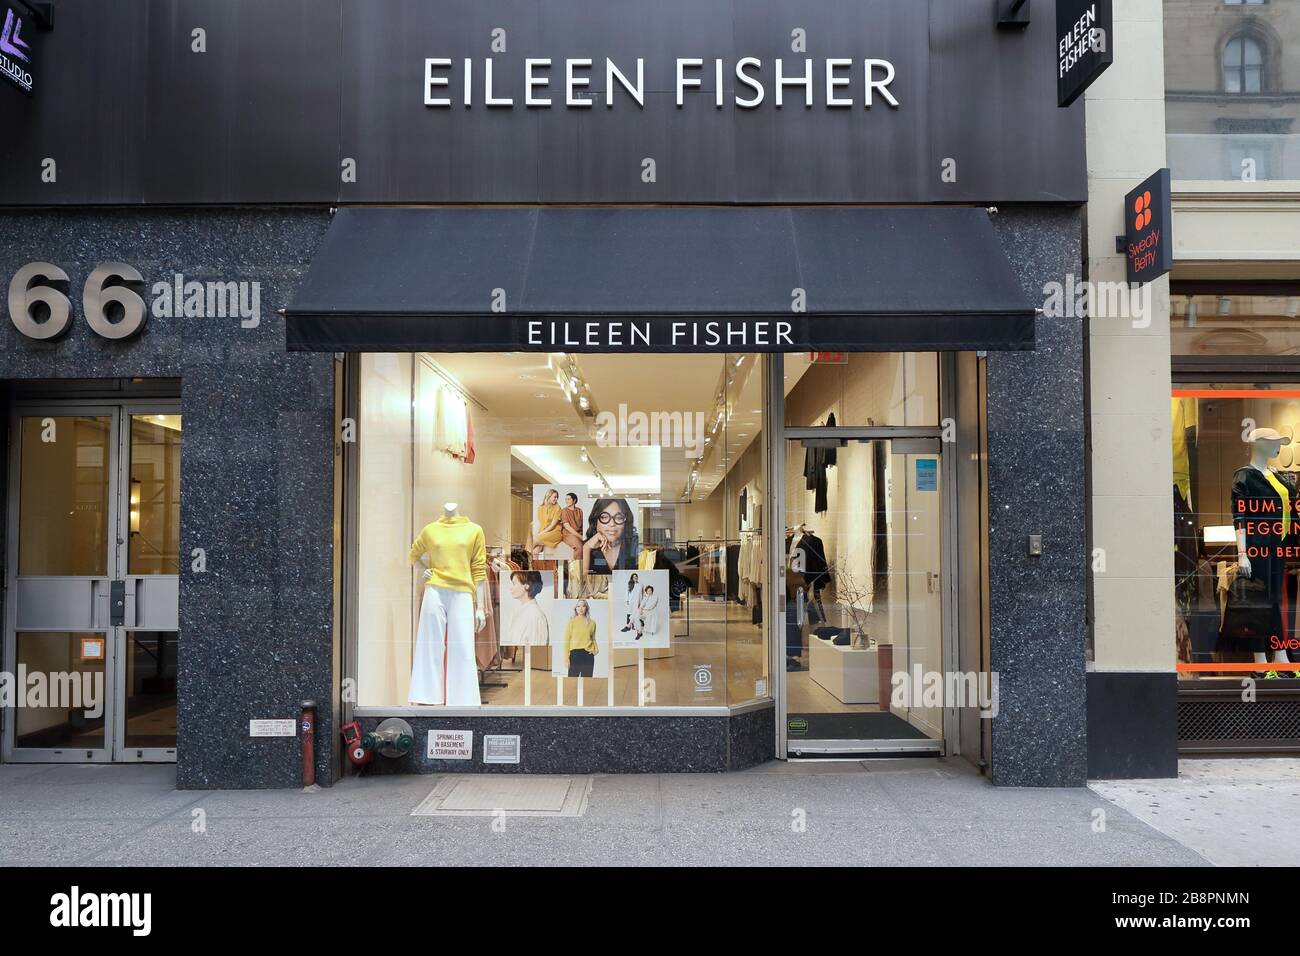 Eileen Fisher, 166 Fifth Avenue, New York. NYC storefront photo of a designer clothing shop in the Flatiron District of Manhattan. Stock Photo